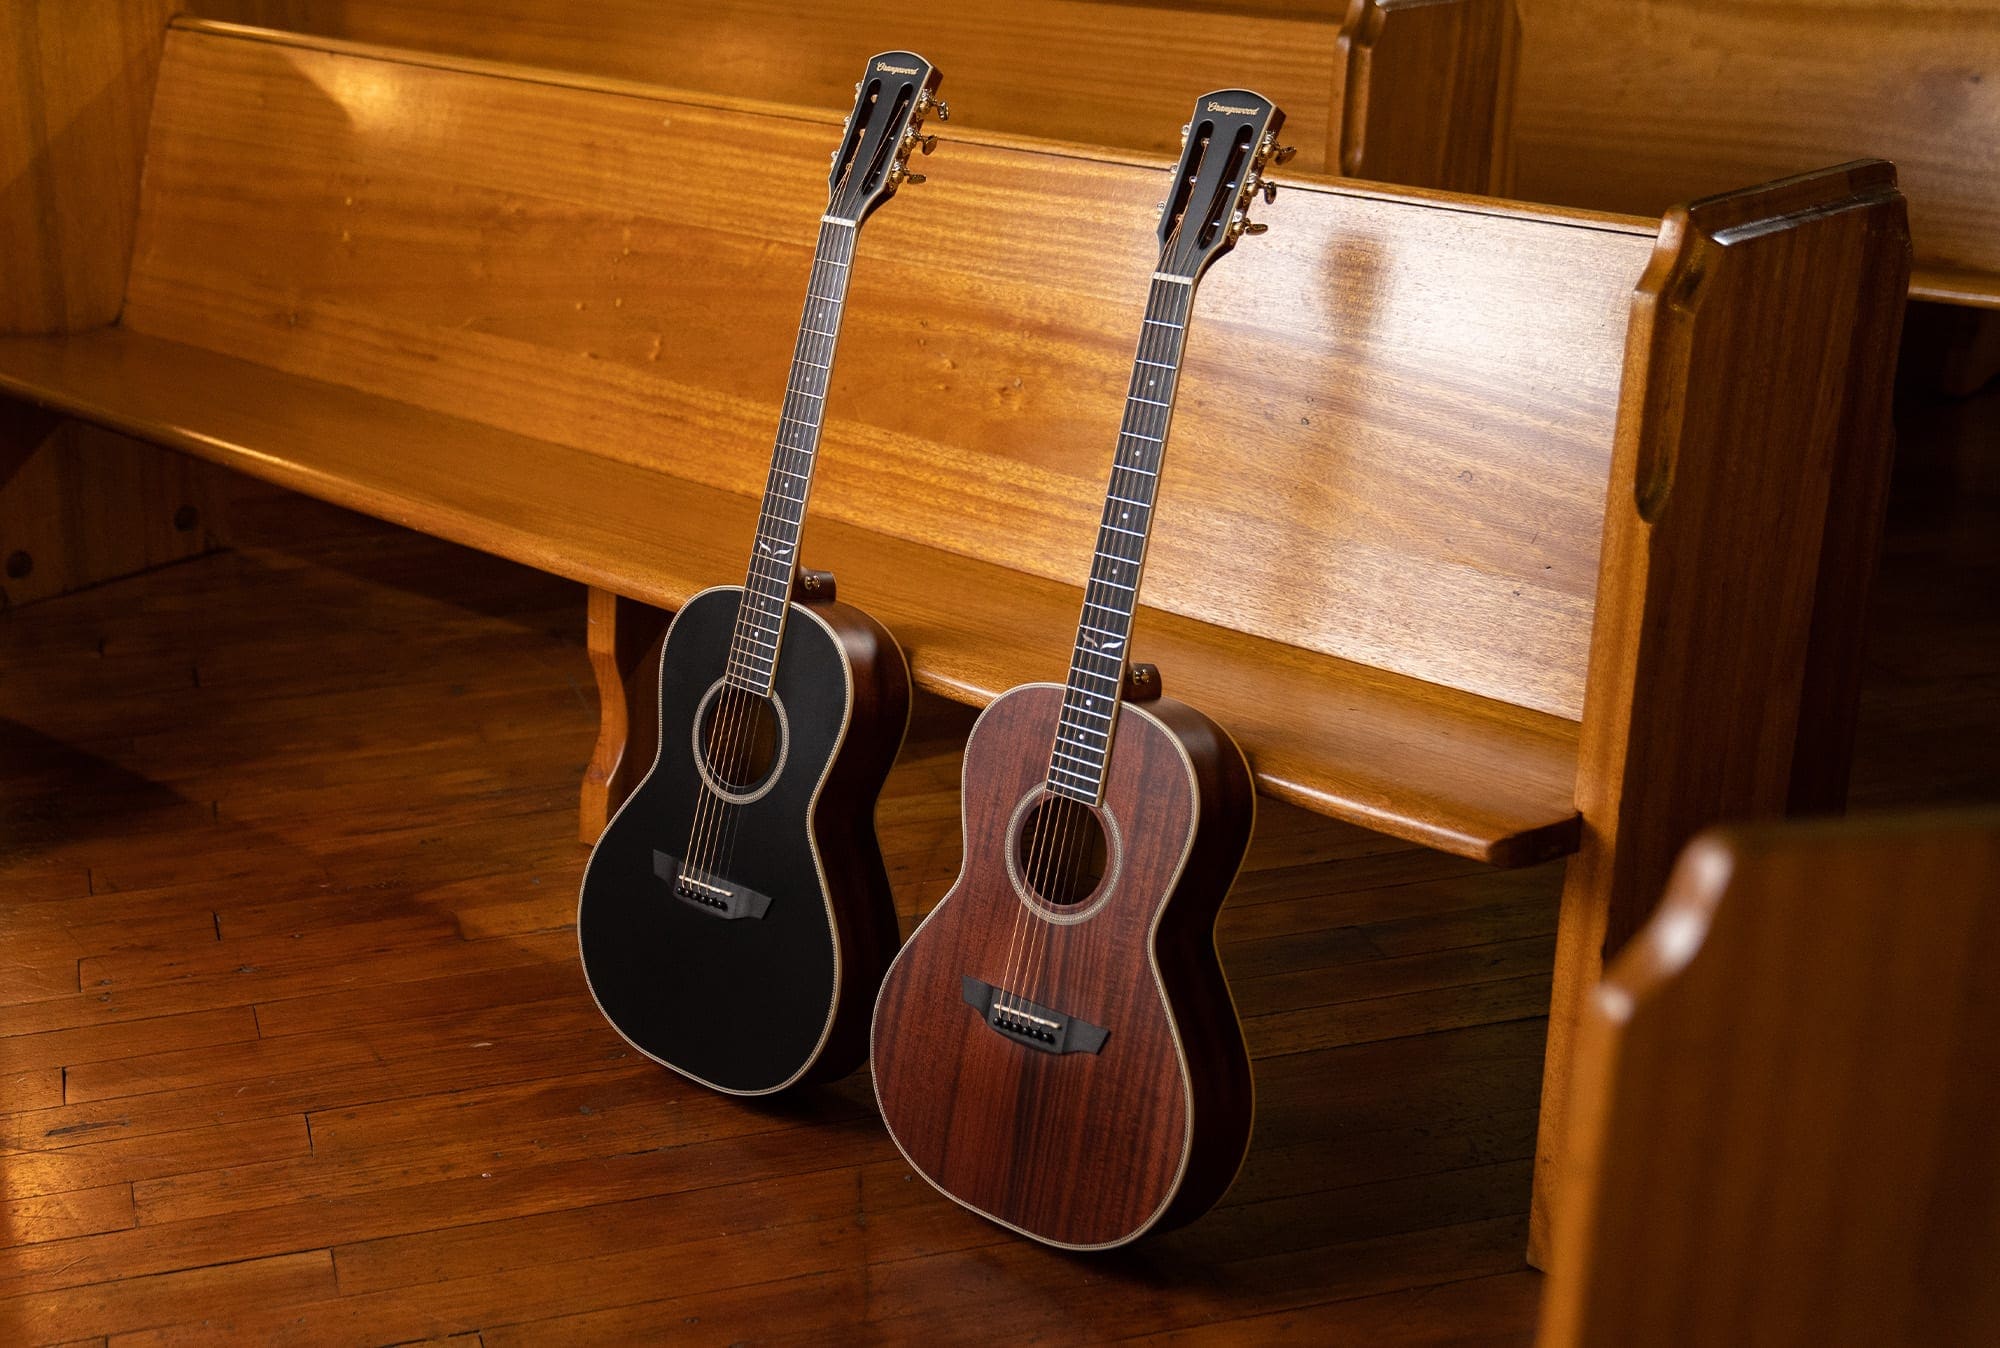 History You Can Play: Parlor Guitars and the Sound of Today